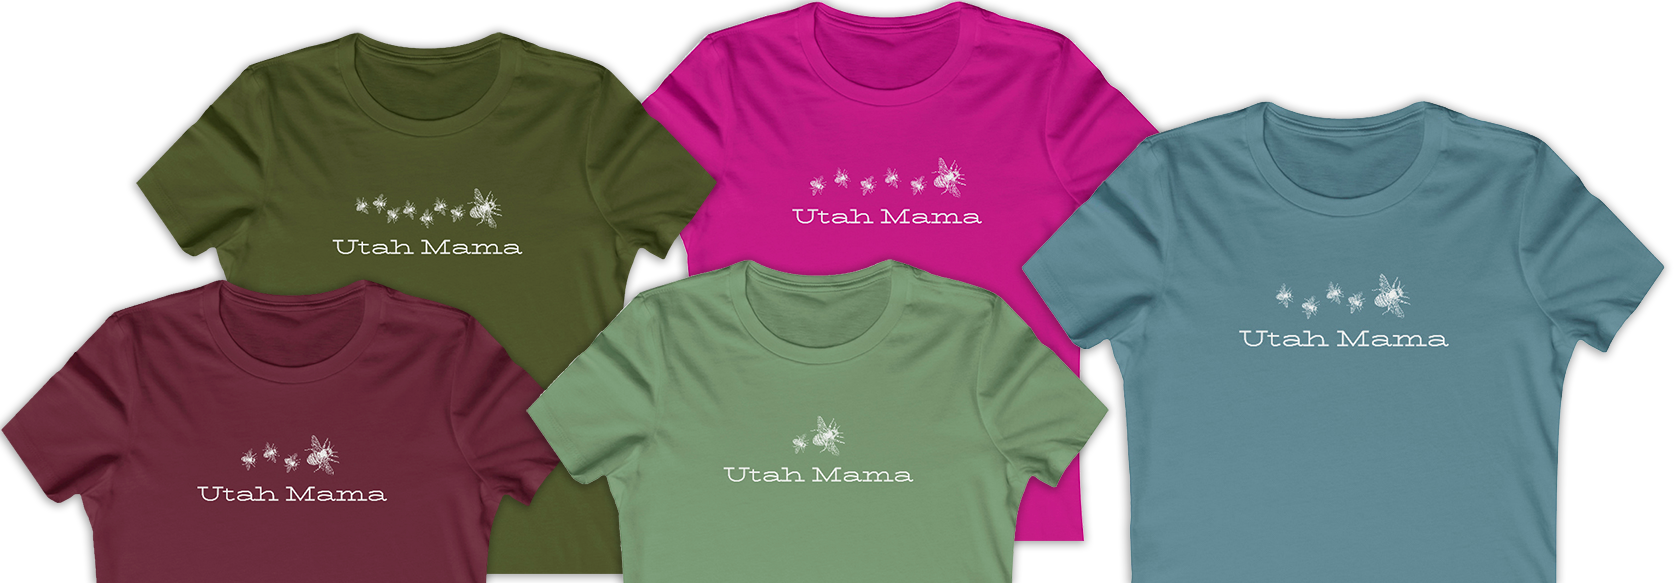 Utah Mama Mothers Day t-shirts gifts for mom